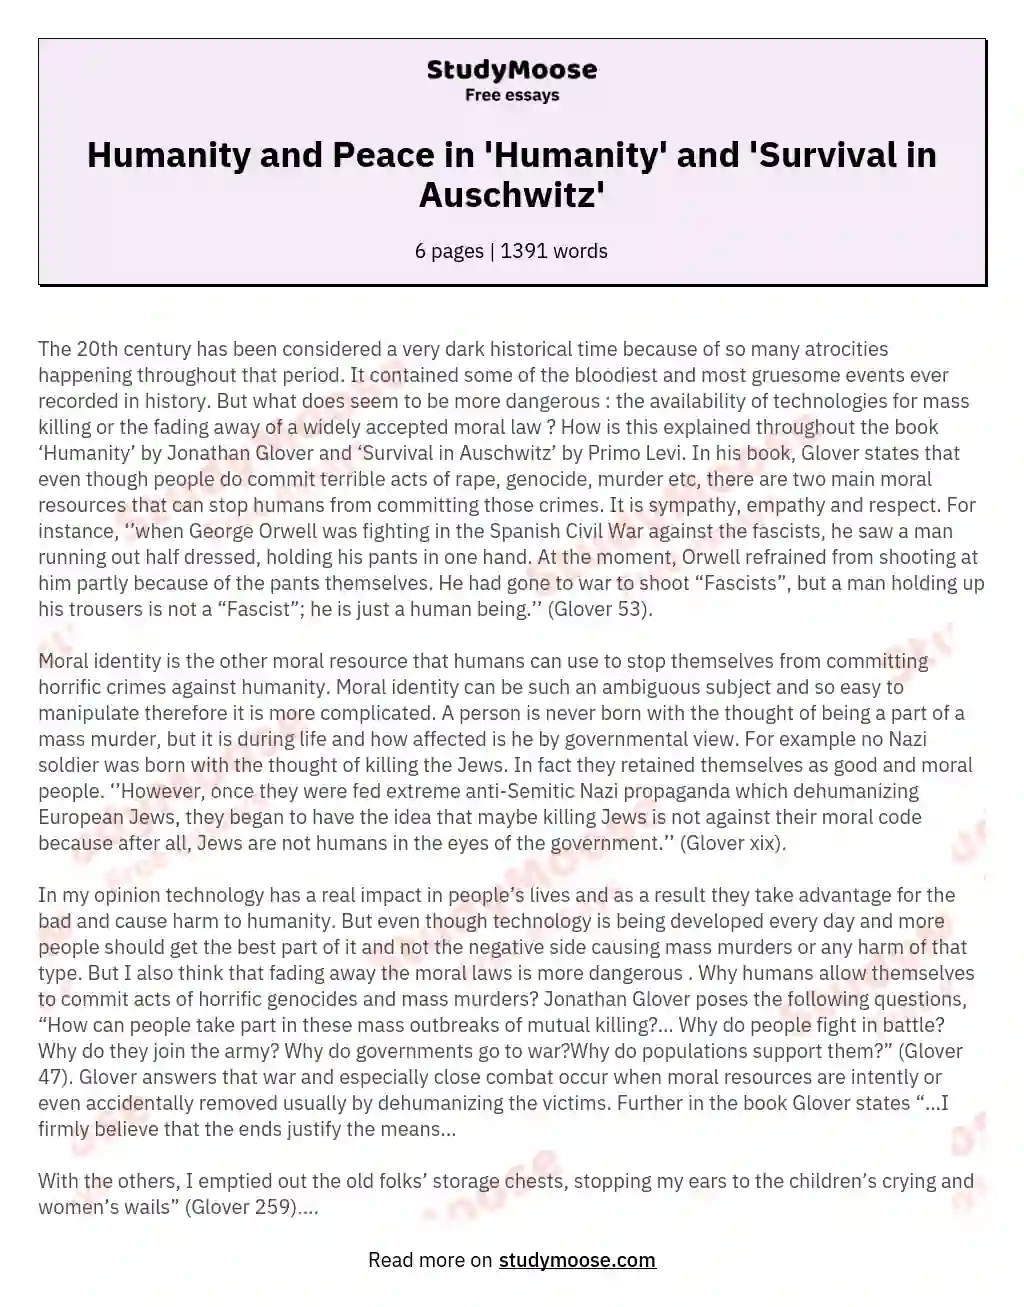 Humanity and Peace in 'Humanity' and 'Survival in Auschwitz' essay